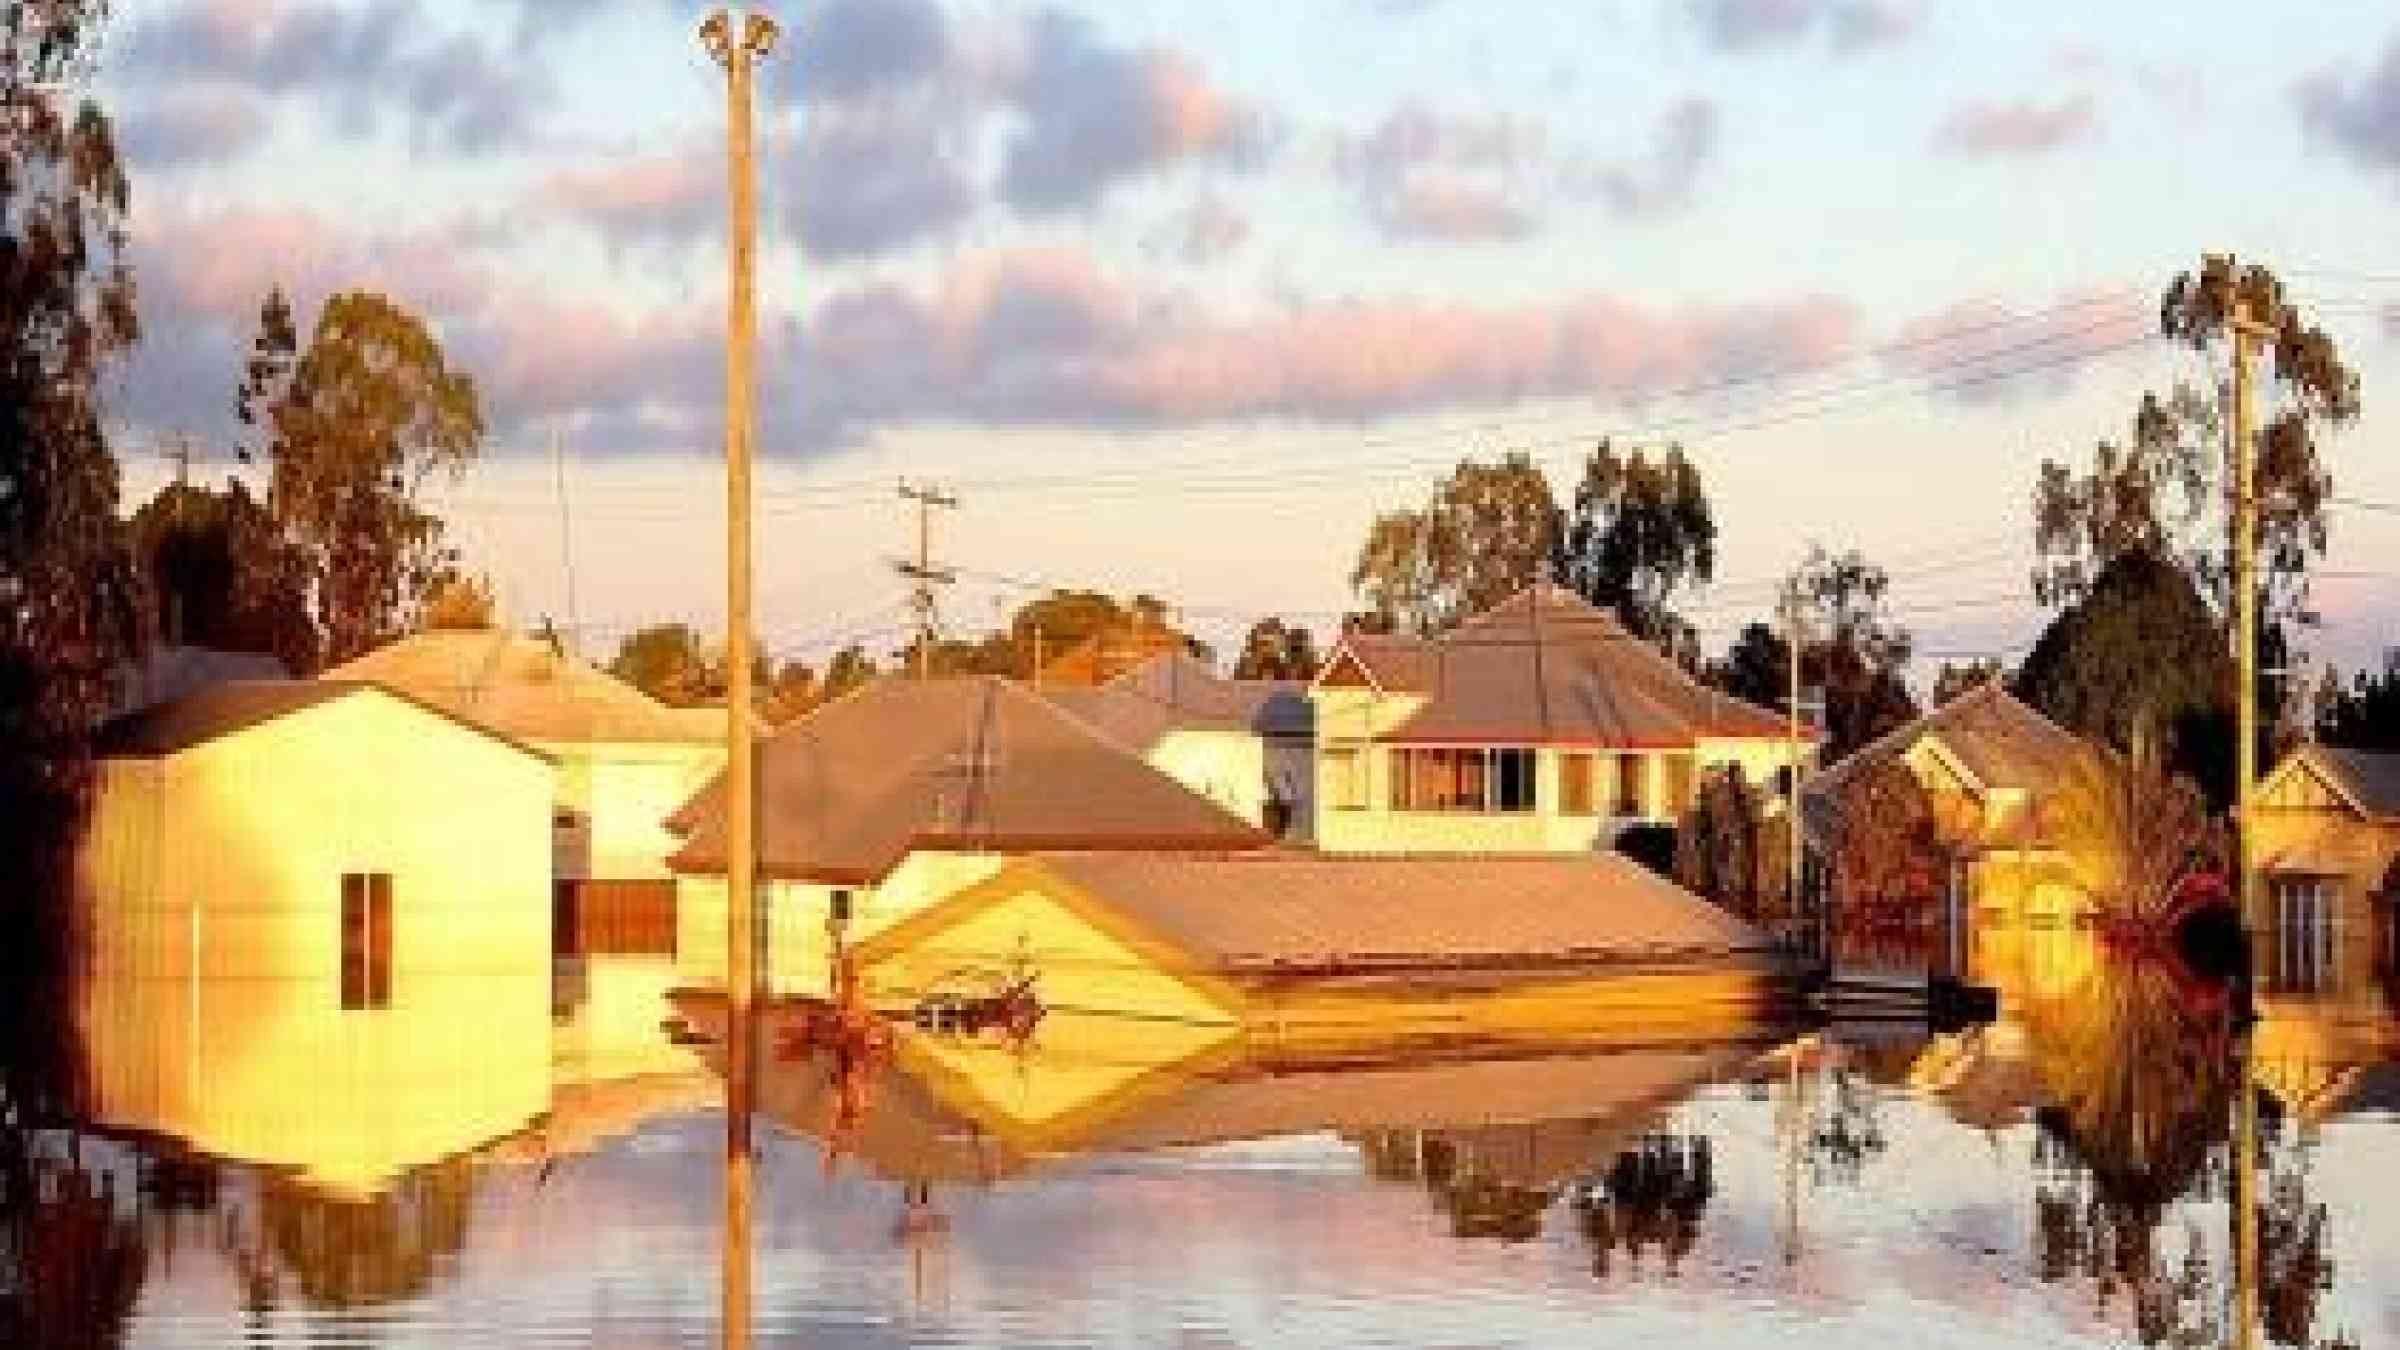 Hazards such as floods are a key test for the resilience of businesses and the communities of which they are part (Photo: Australian Business Roundtable)